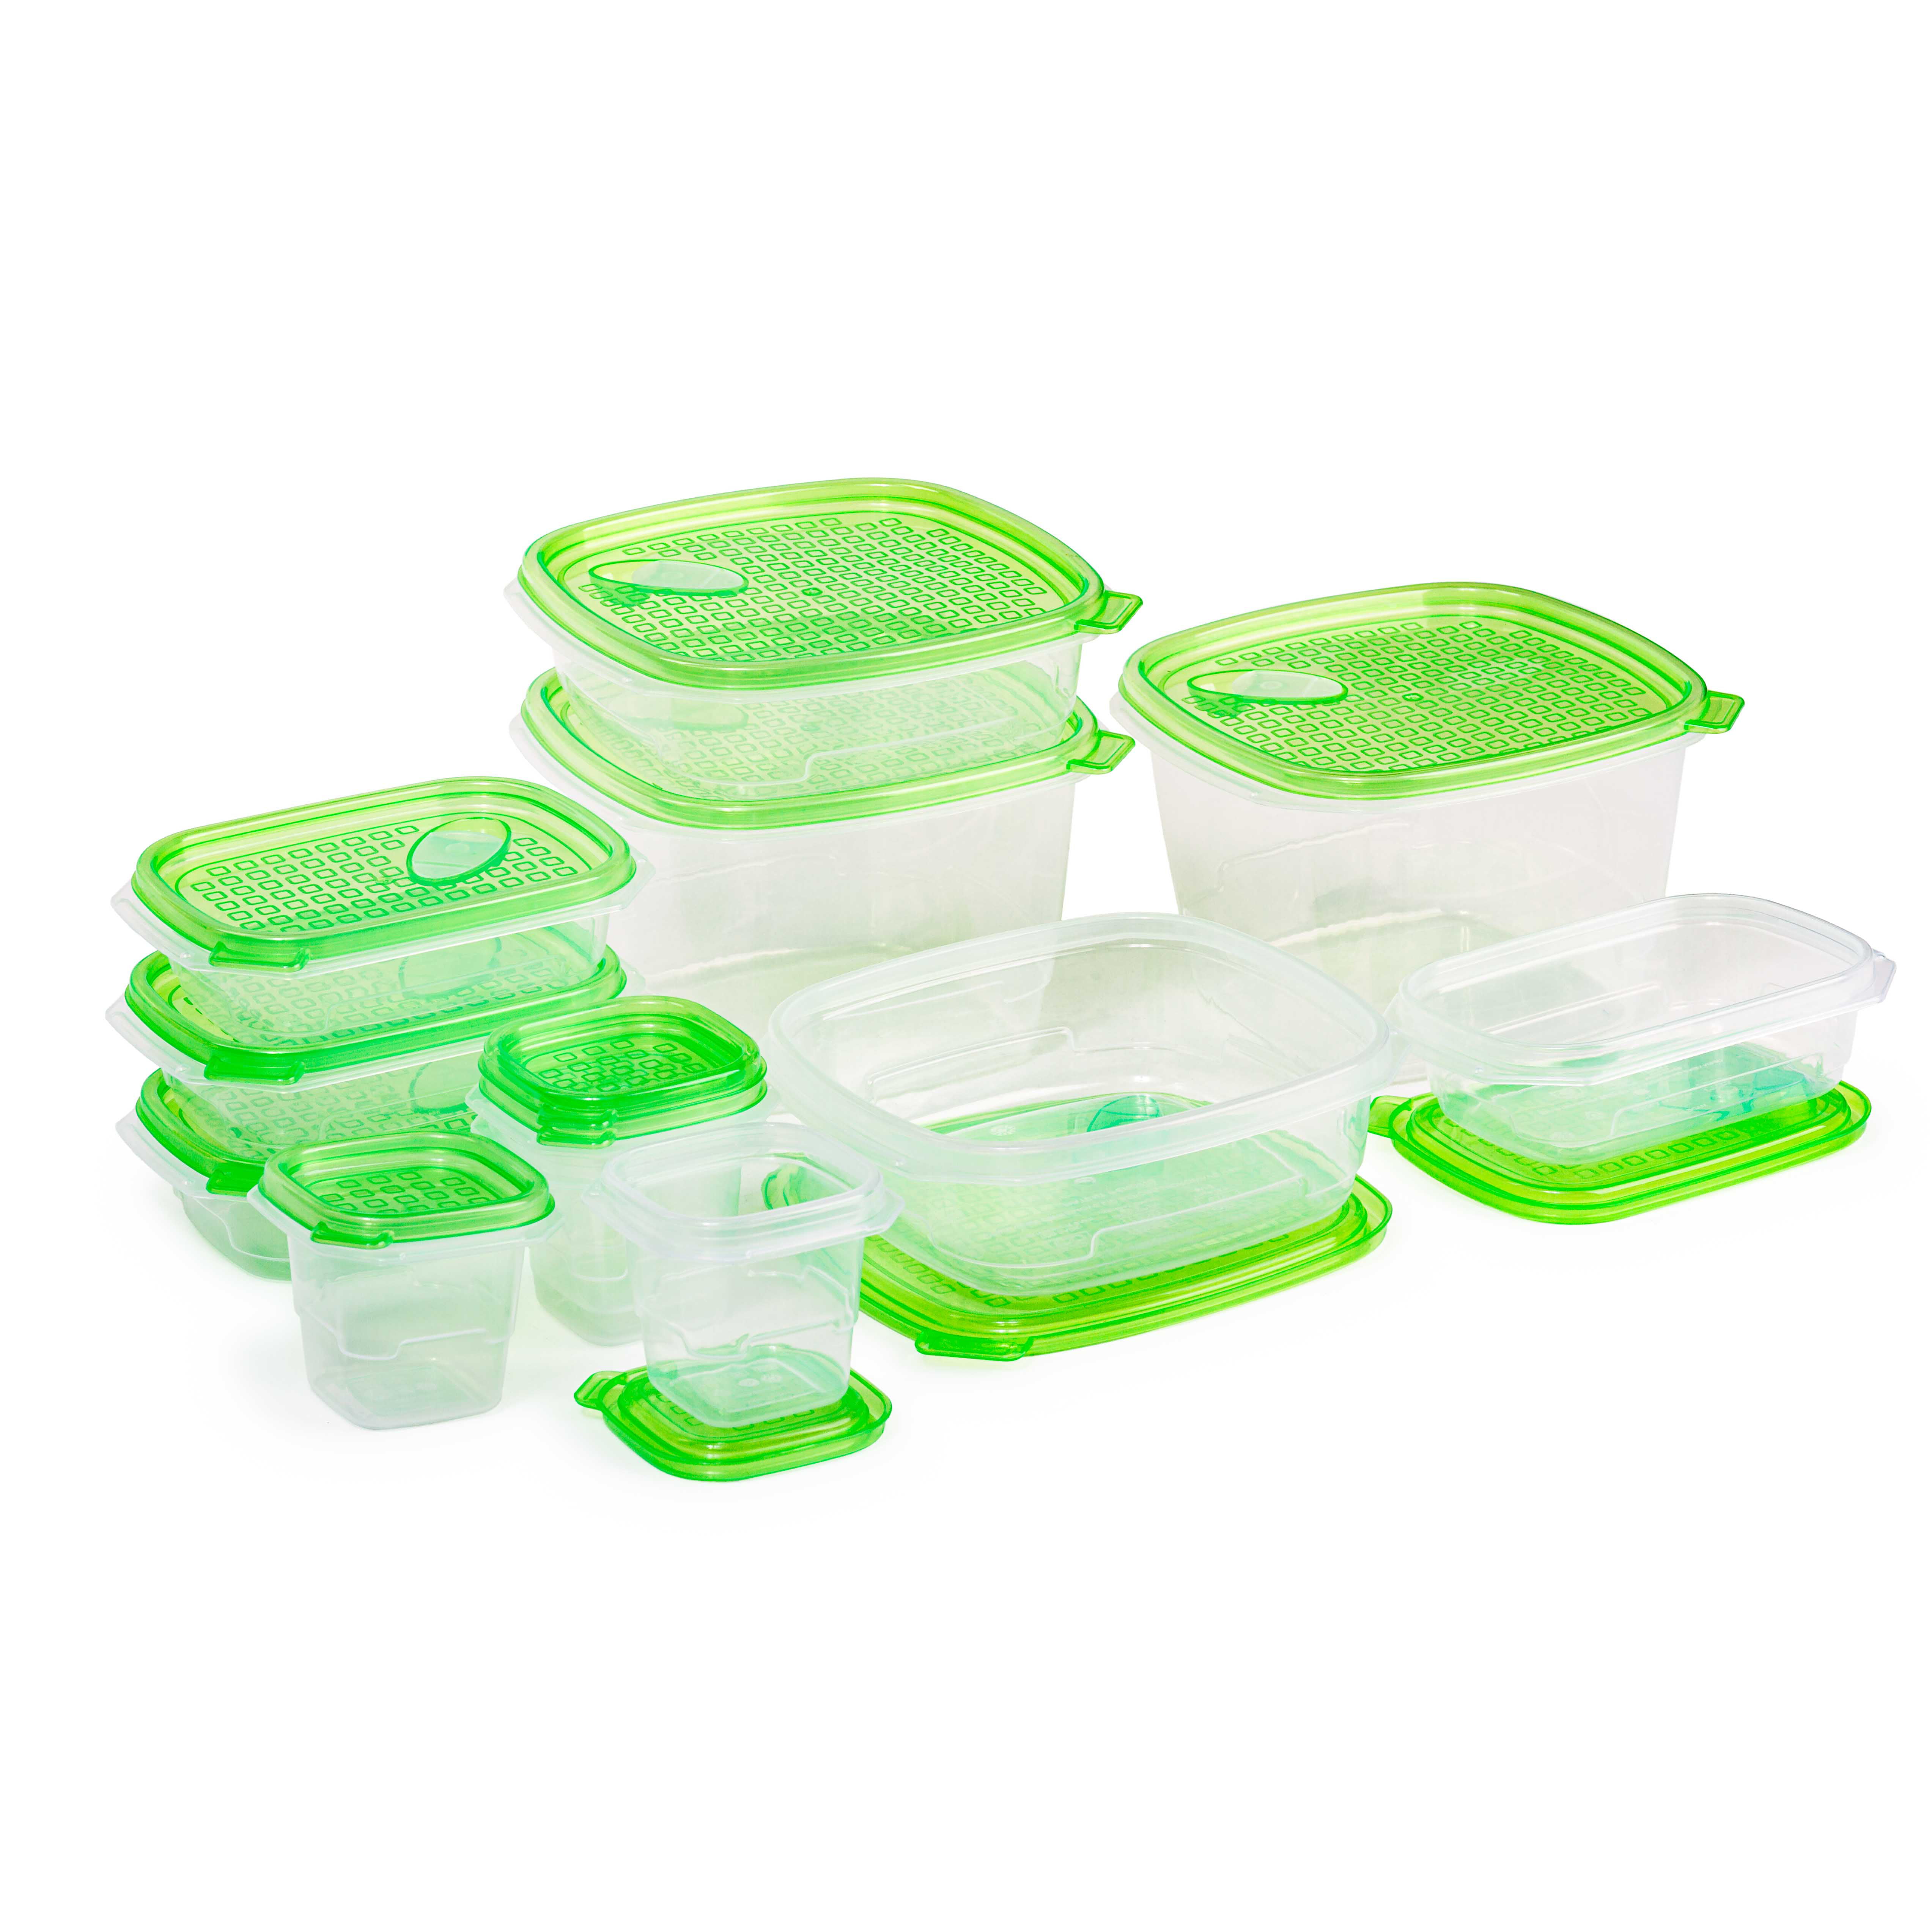 Glass Meal Prep Storage Containers - Oven Safe Borosilicate Glass by Lexi  Home - 8 pcs, Green - Lexi Home